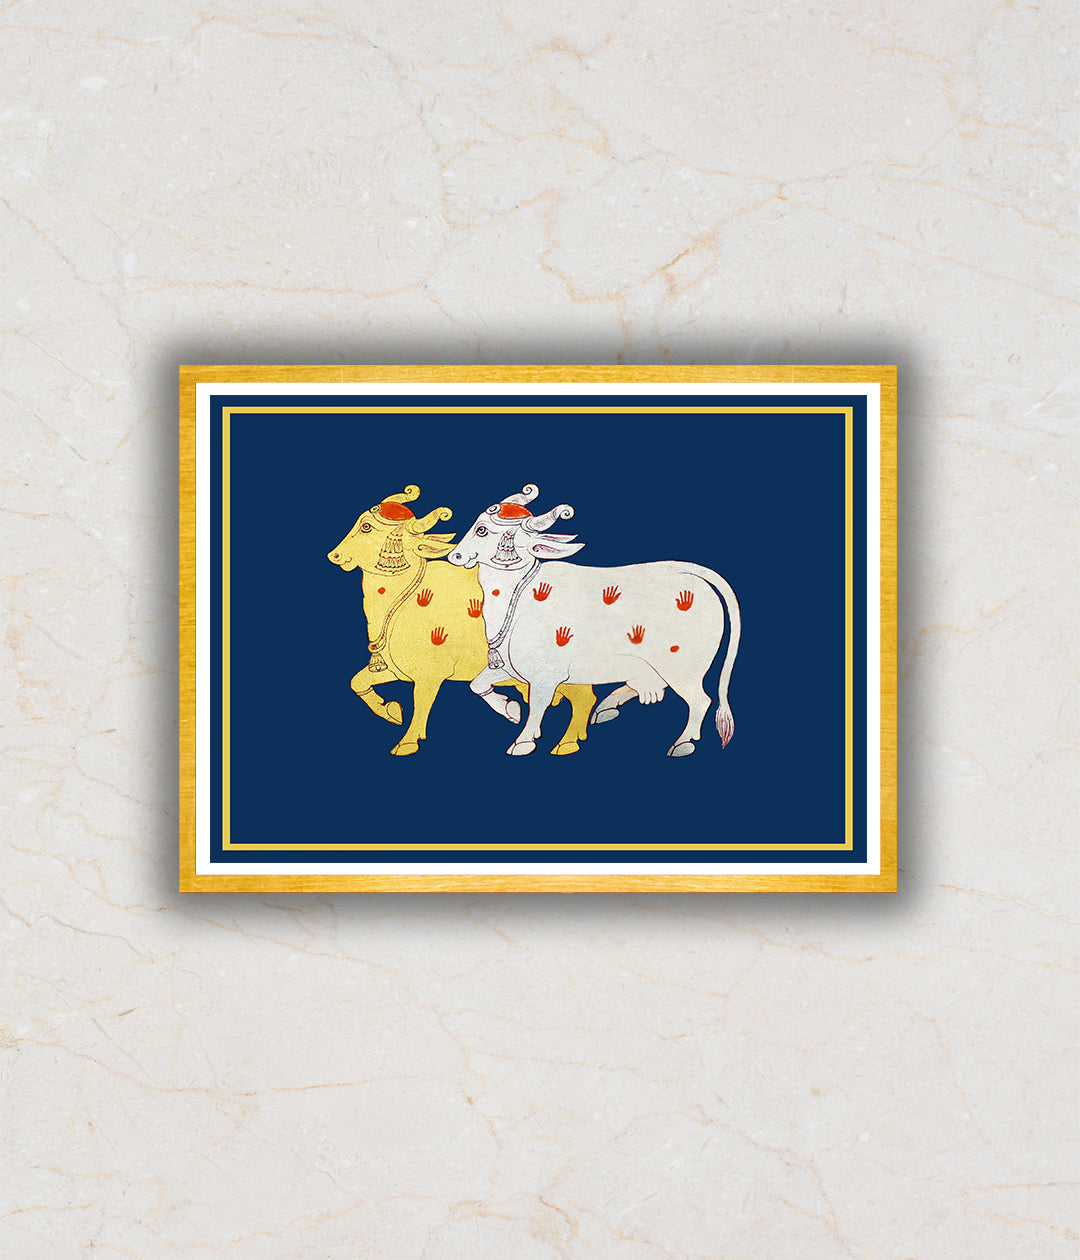 Silver and Gold Devoted Cow Pichwai Art Painting For Home Wall Art Decor